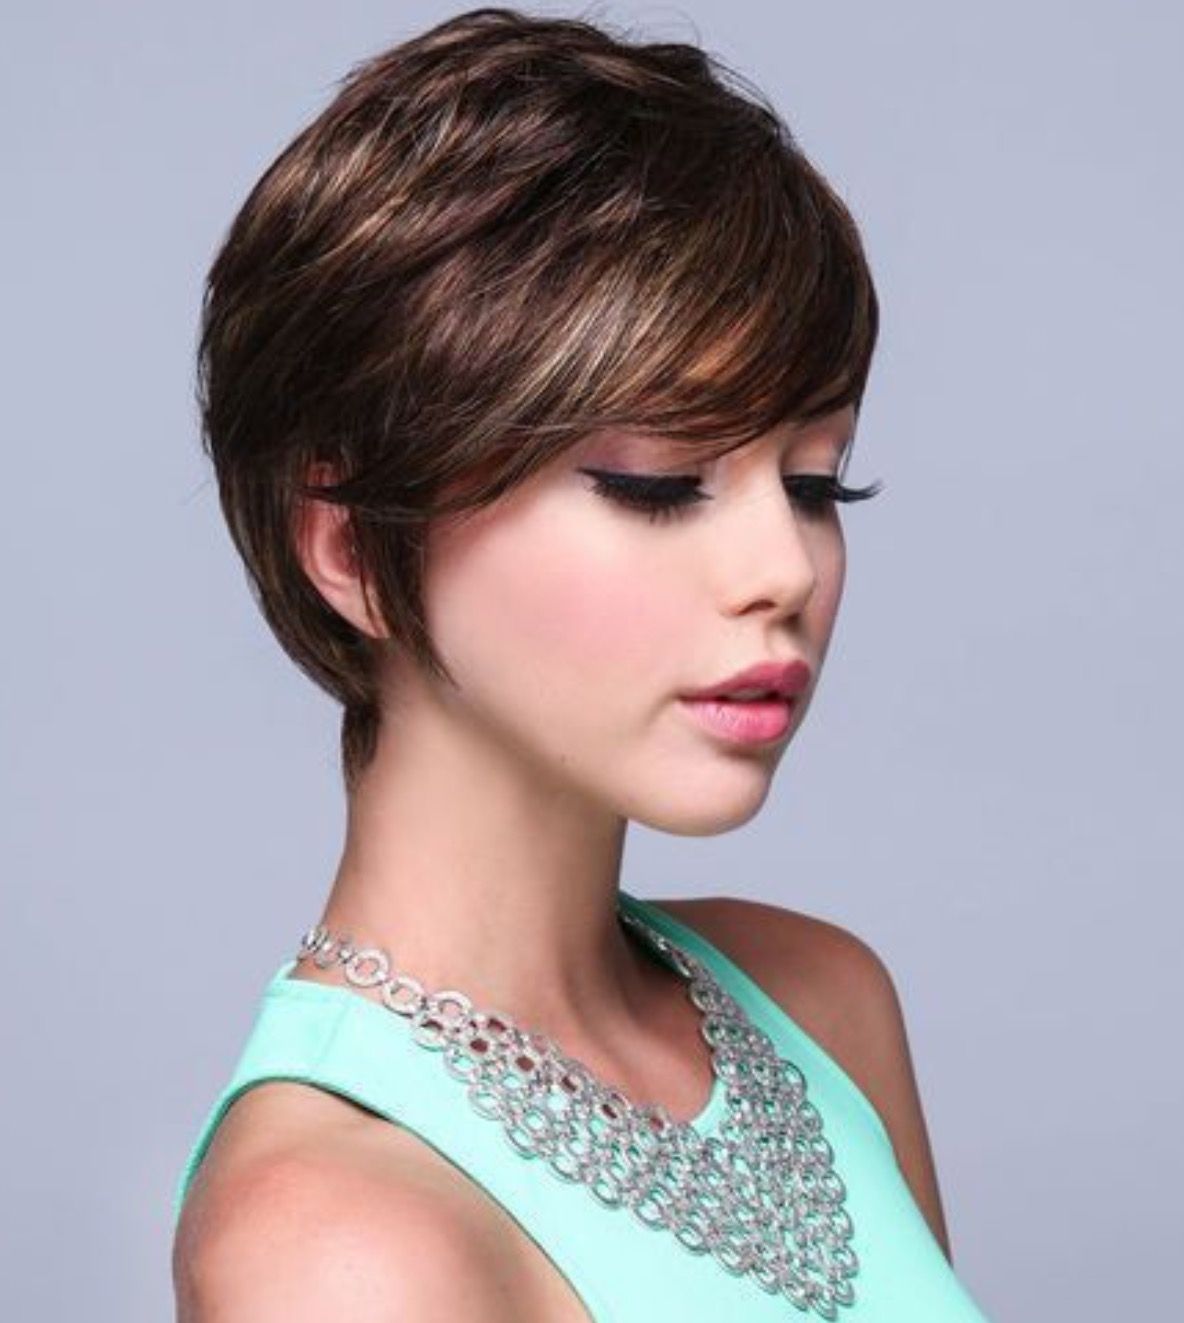 Very Cute Long Pixie Cut | Things That Catch My Eye | Pinterest For Most Current Very Short Textured Pixie Hairstyles (View 15 of 15)